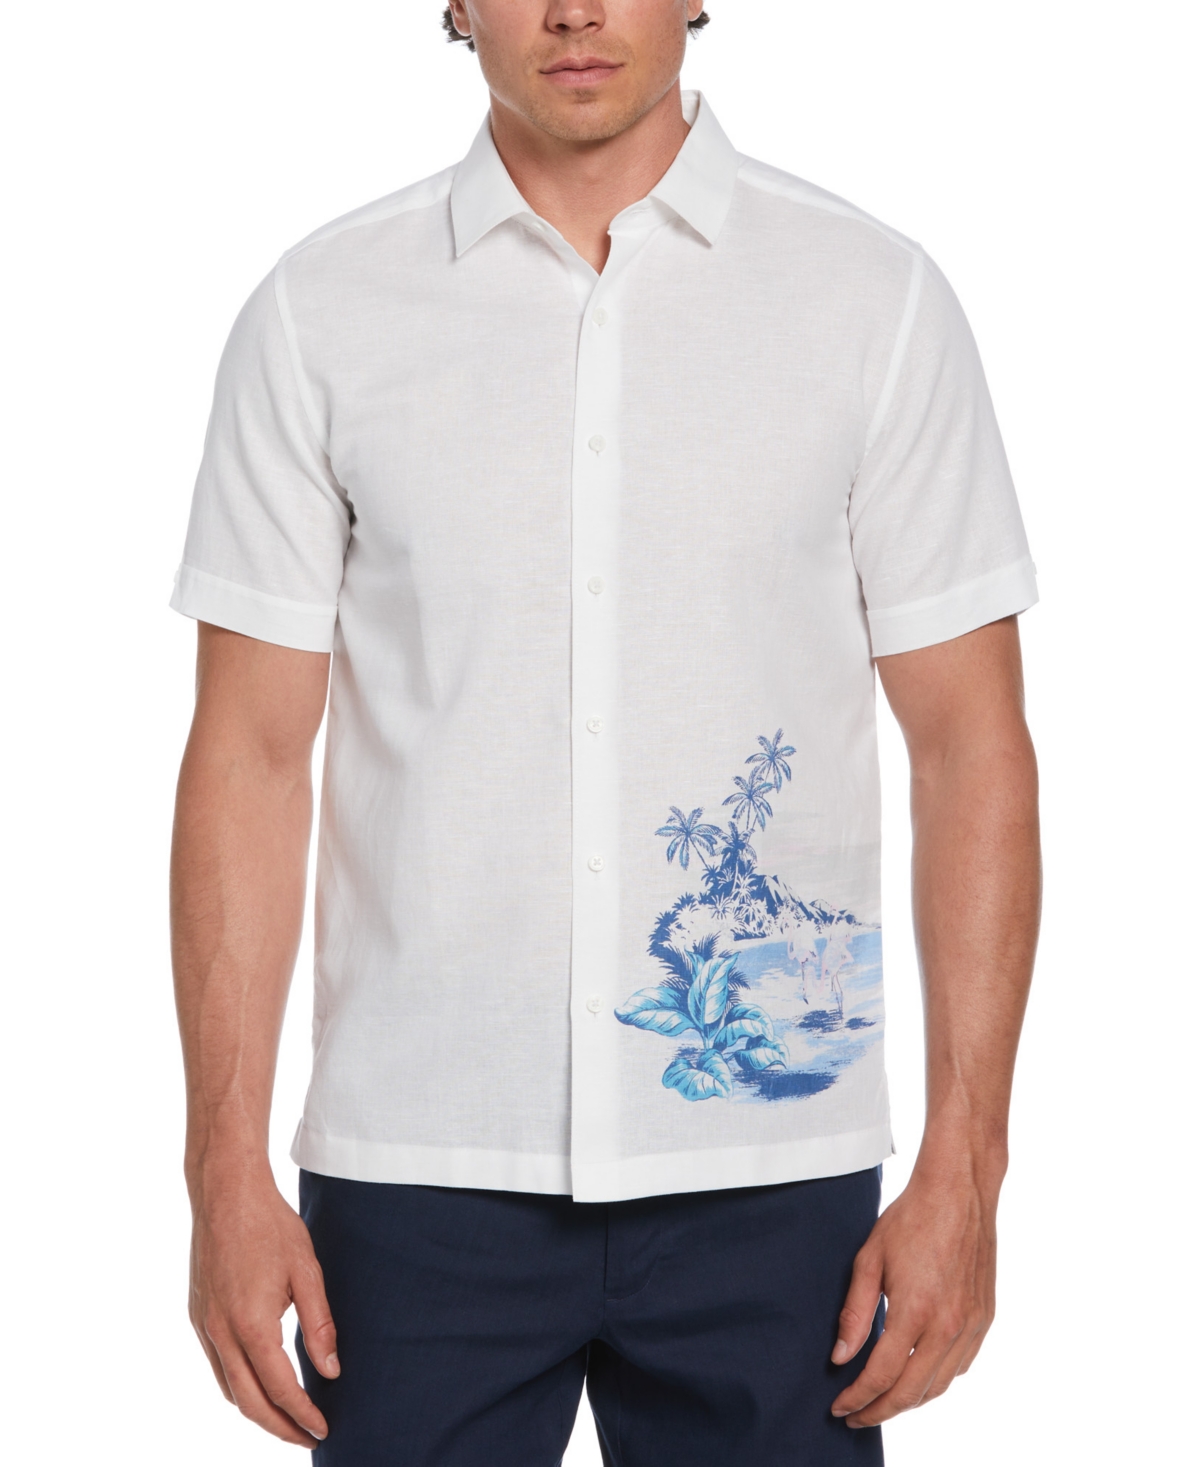 Men's Relaxed-Fit Short Sleeve Button-Front Flamingo Print Shirt - Brilliant White